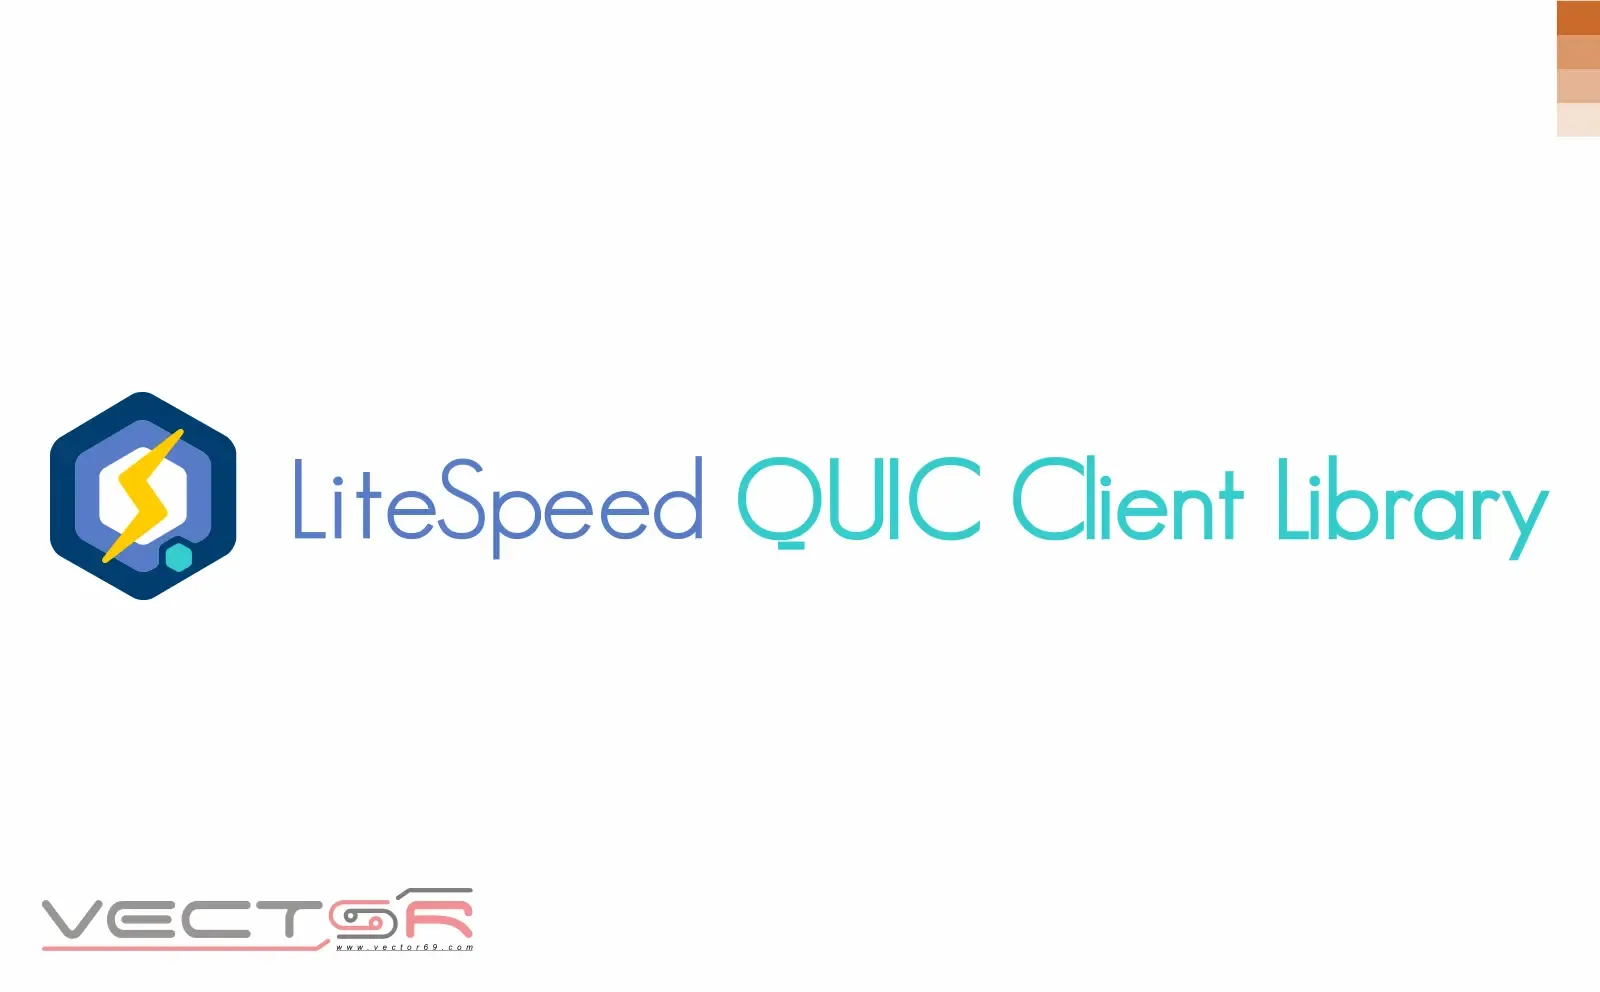 LiteSpeed QUIC Client Library Logo - Download Vector File AI (Adobe Illustrator)